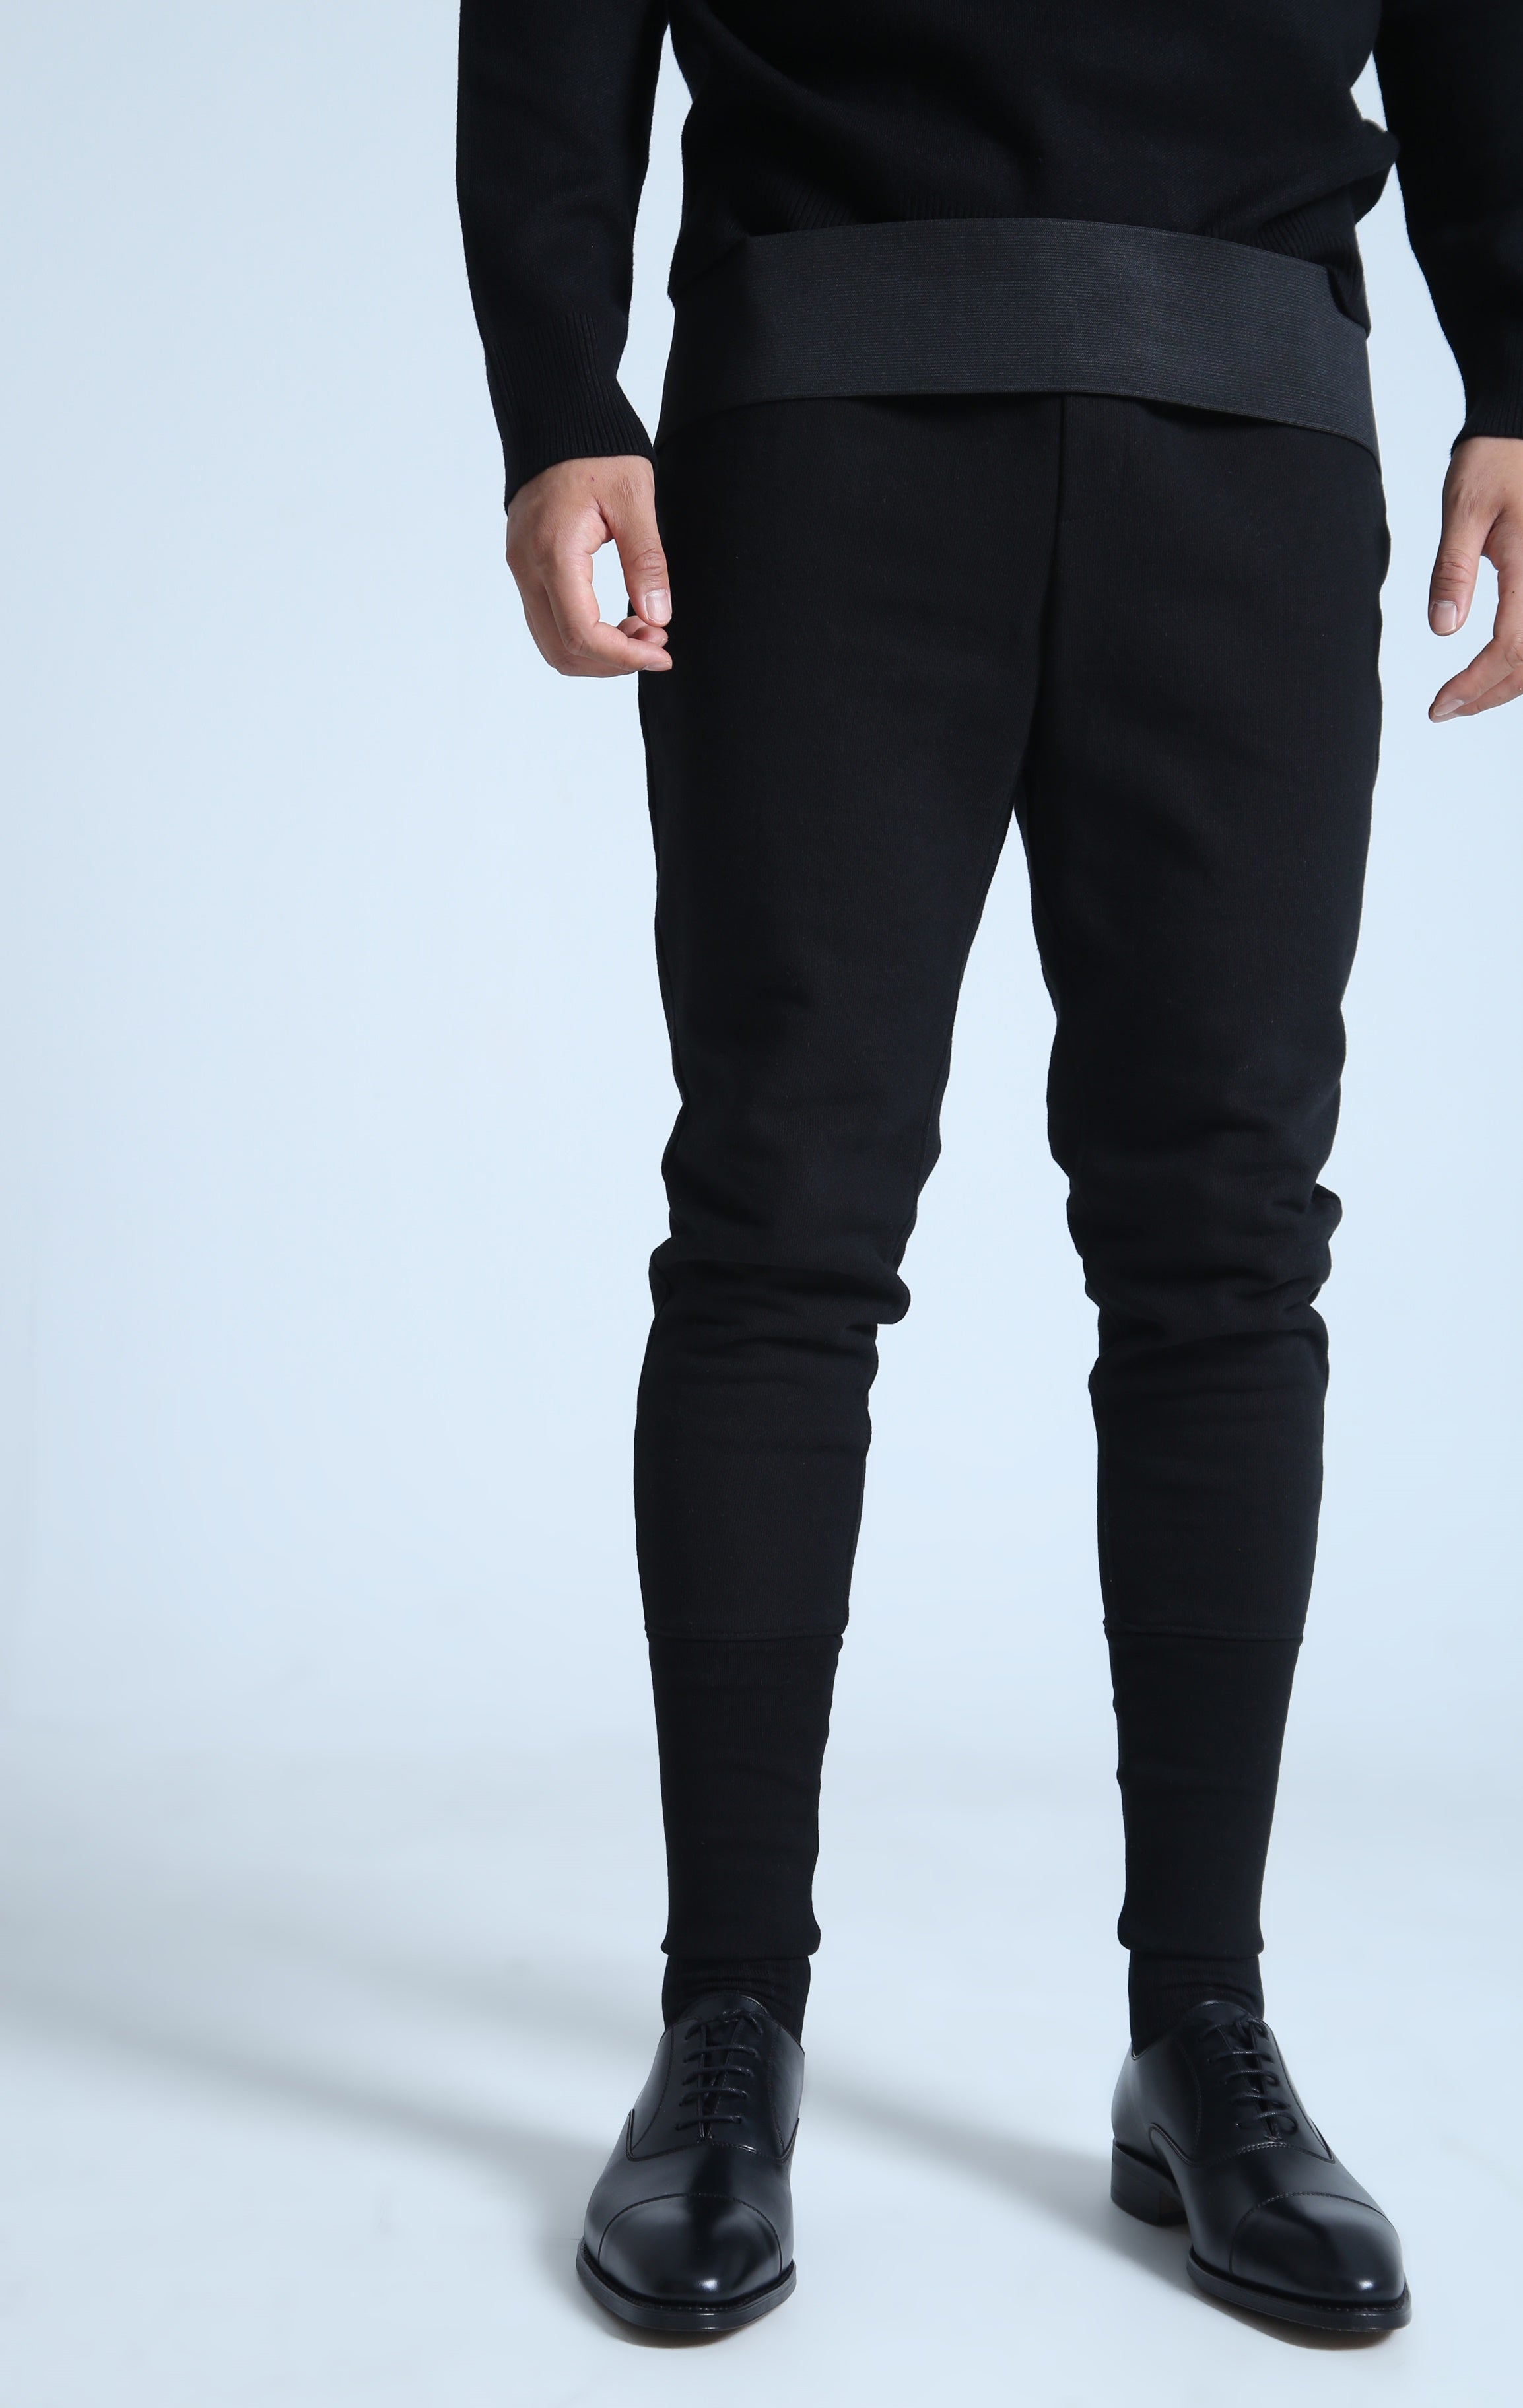 houte couture joggers "tucked-in"